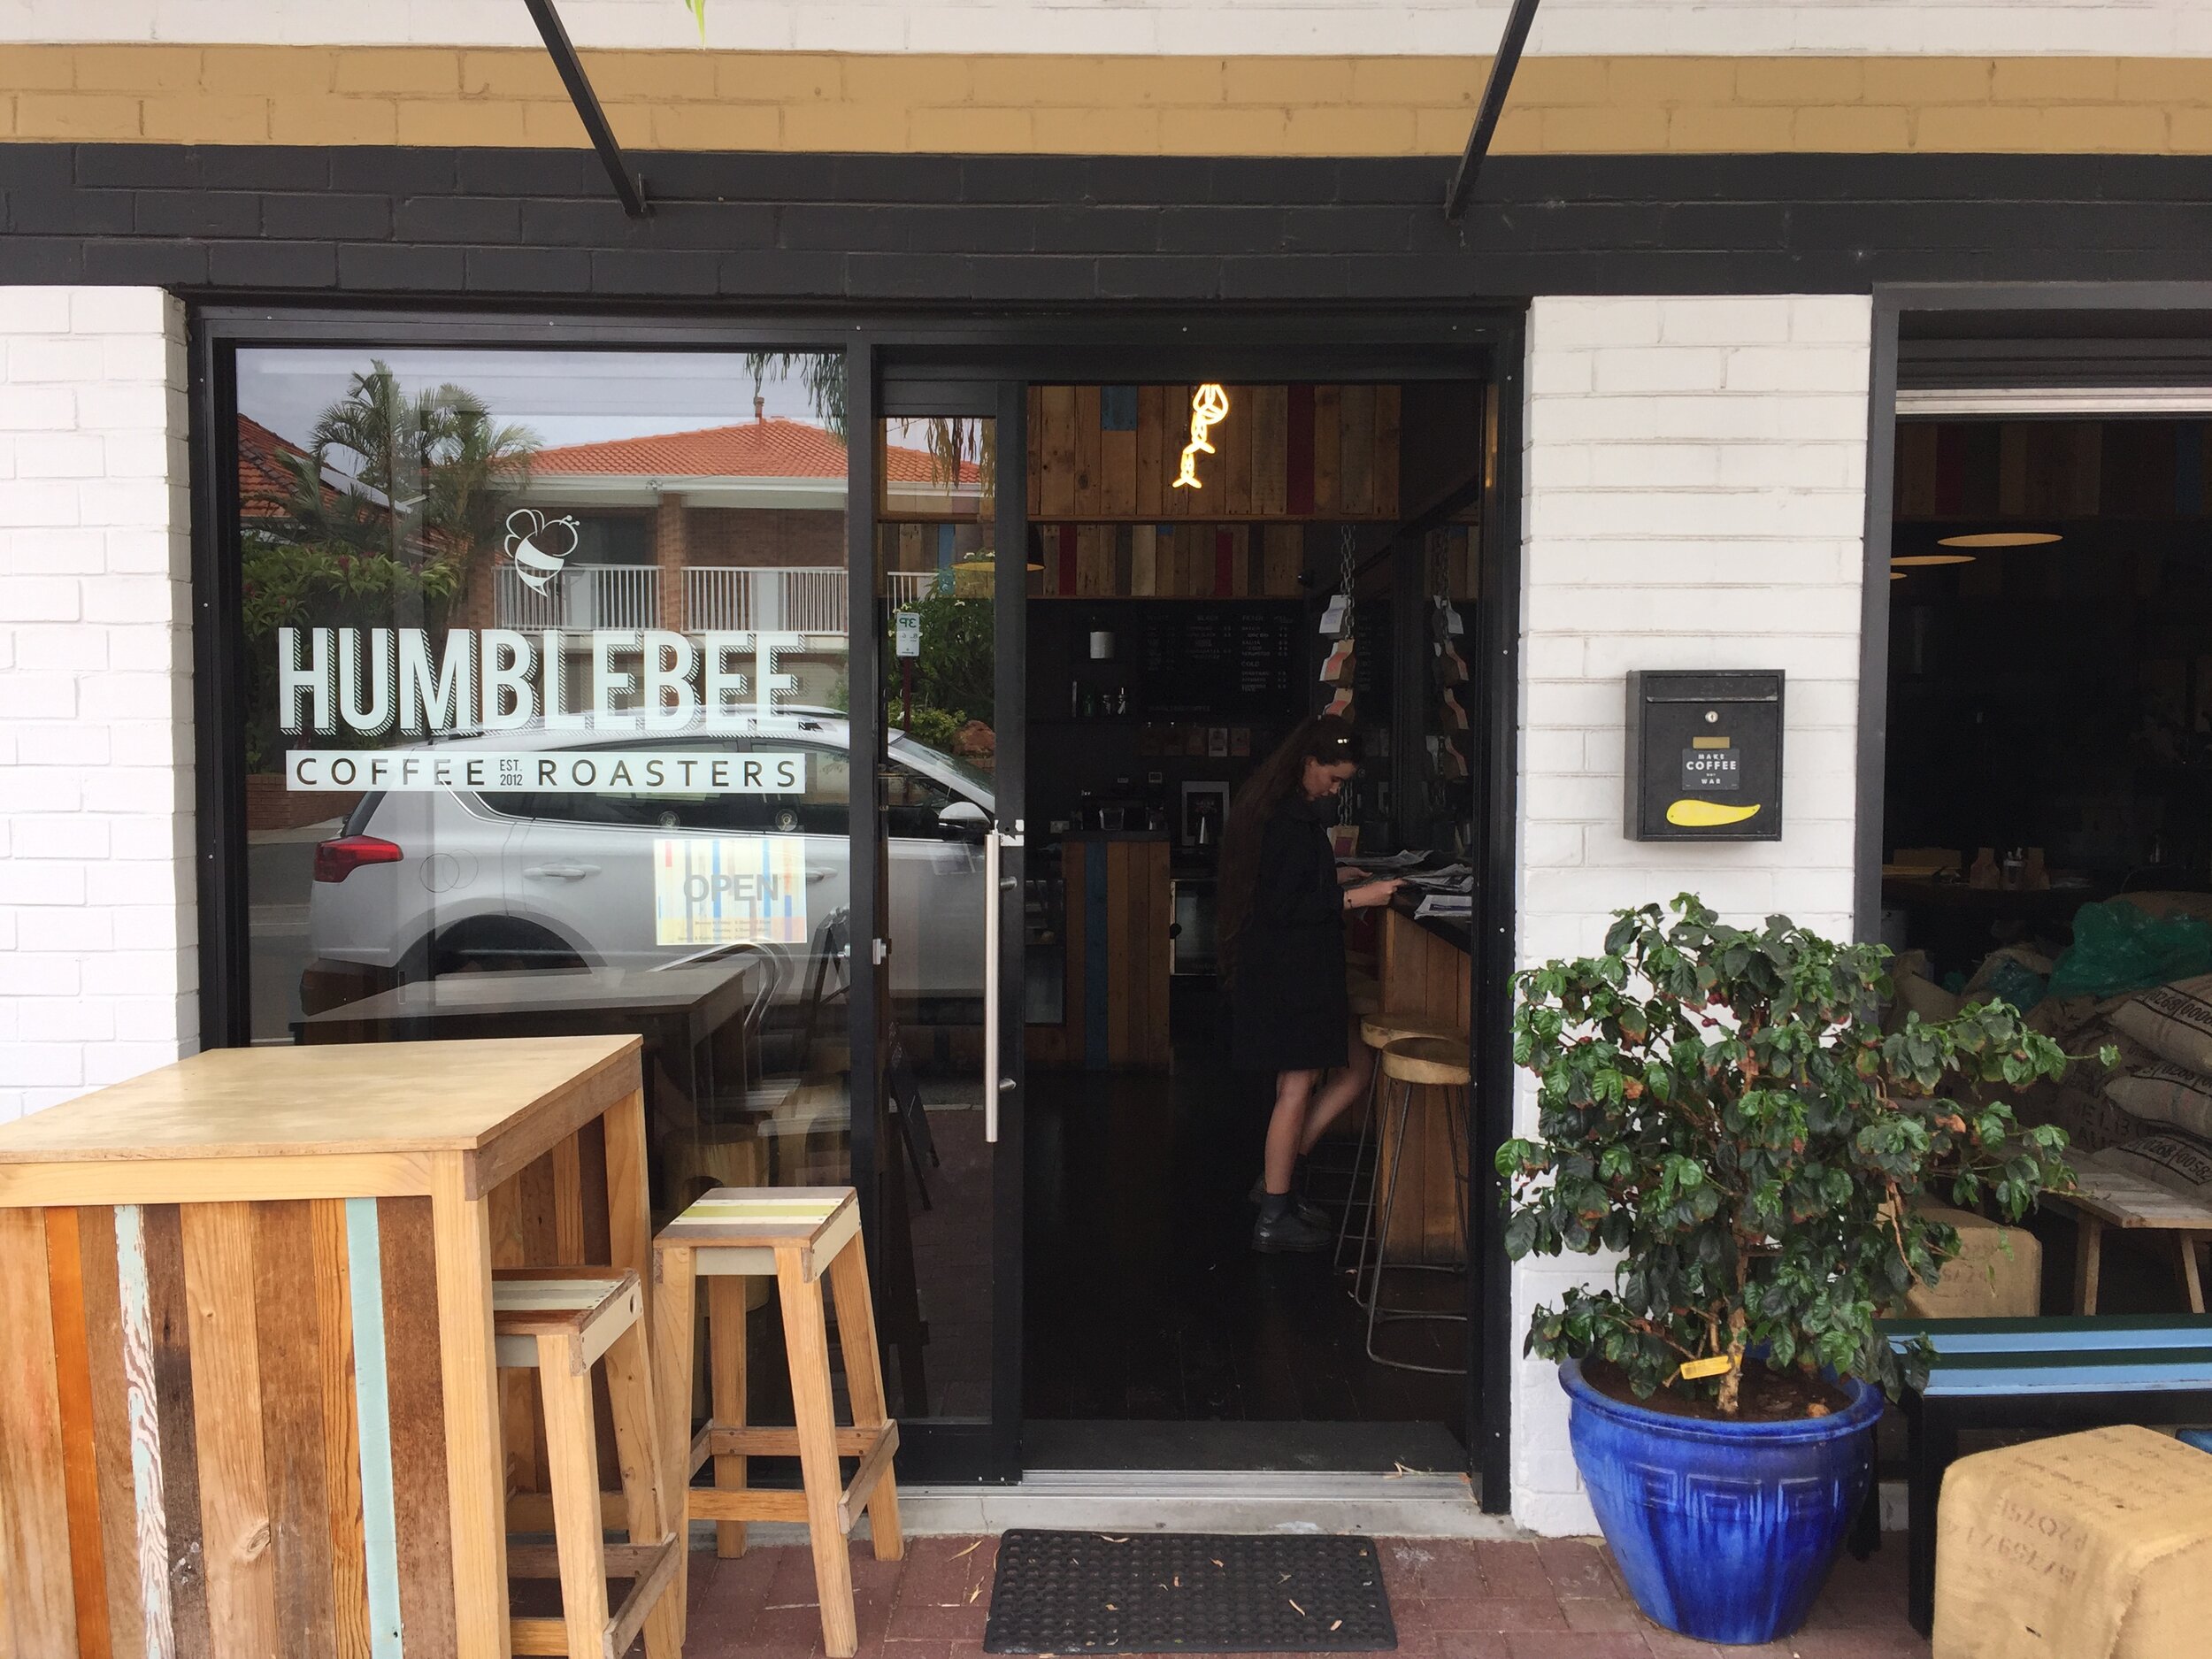 With the café on the left and the roastery on the right, Humblebee offers an awesome space to check out.